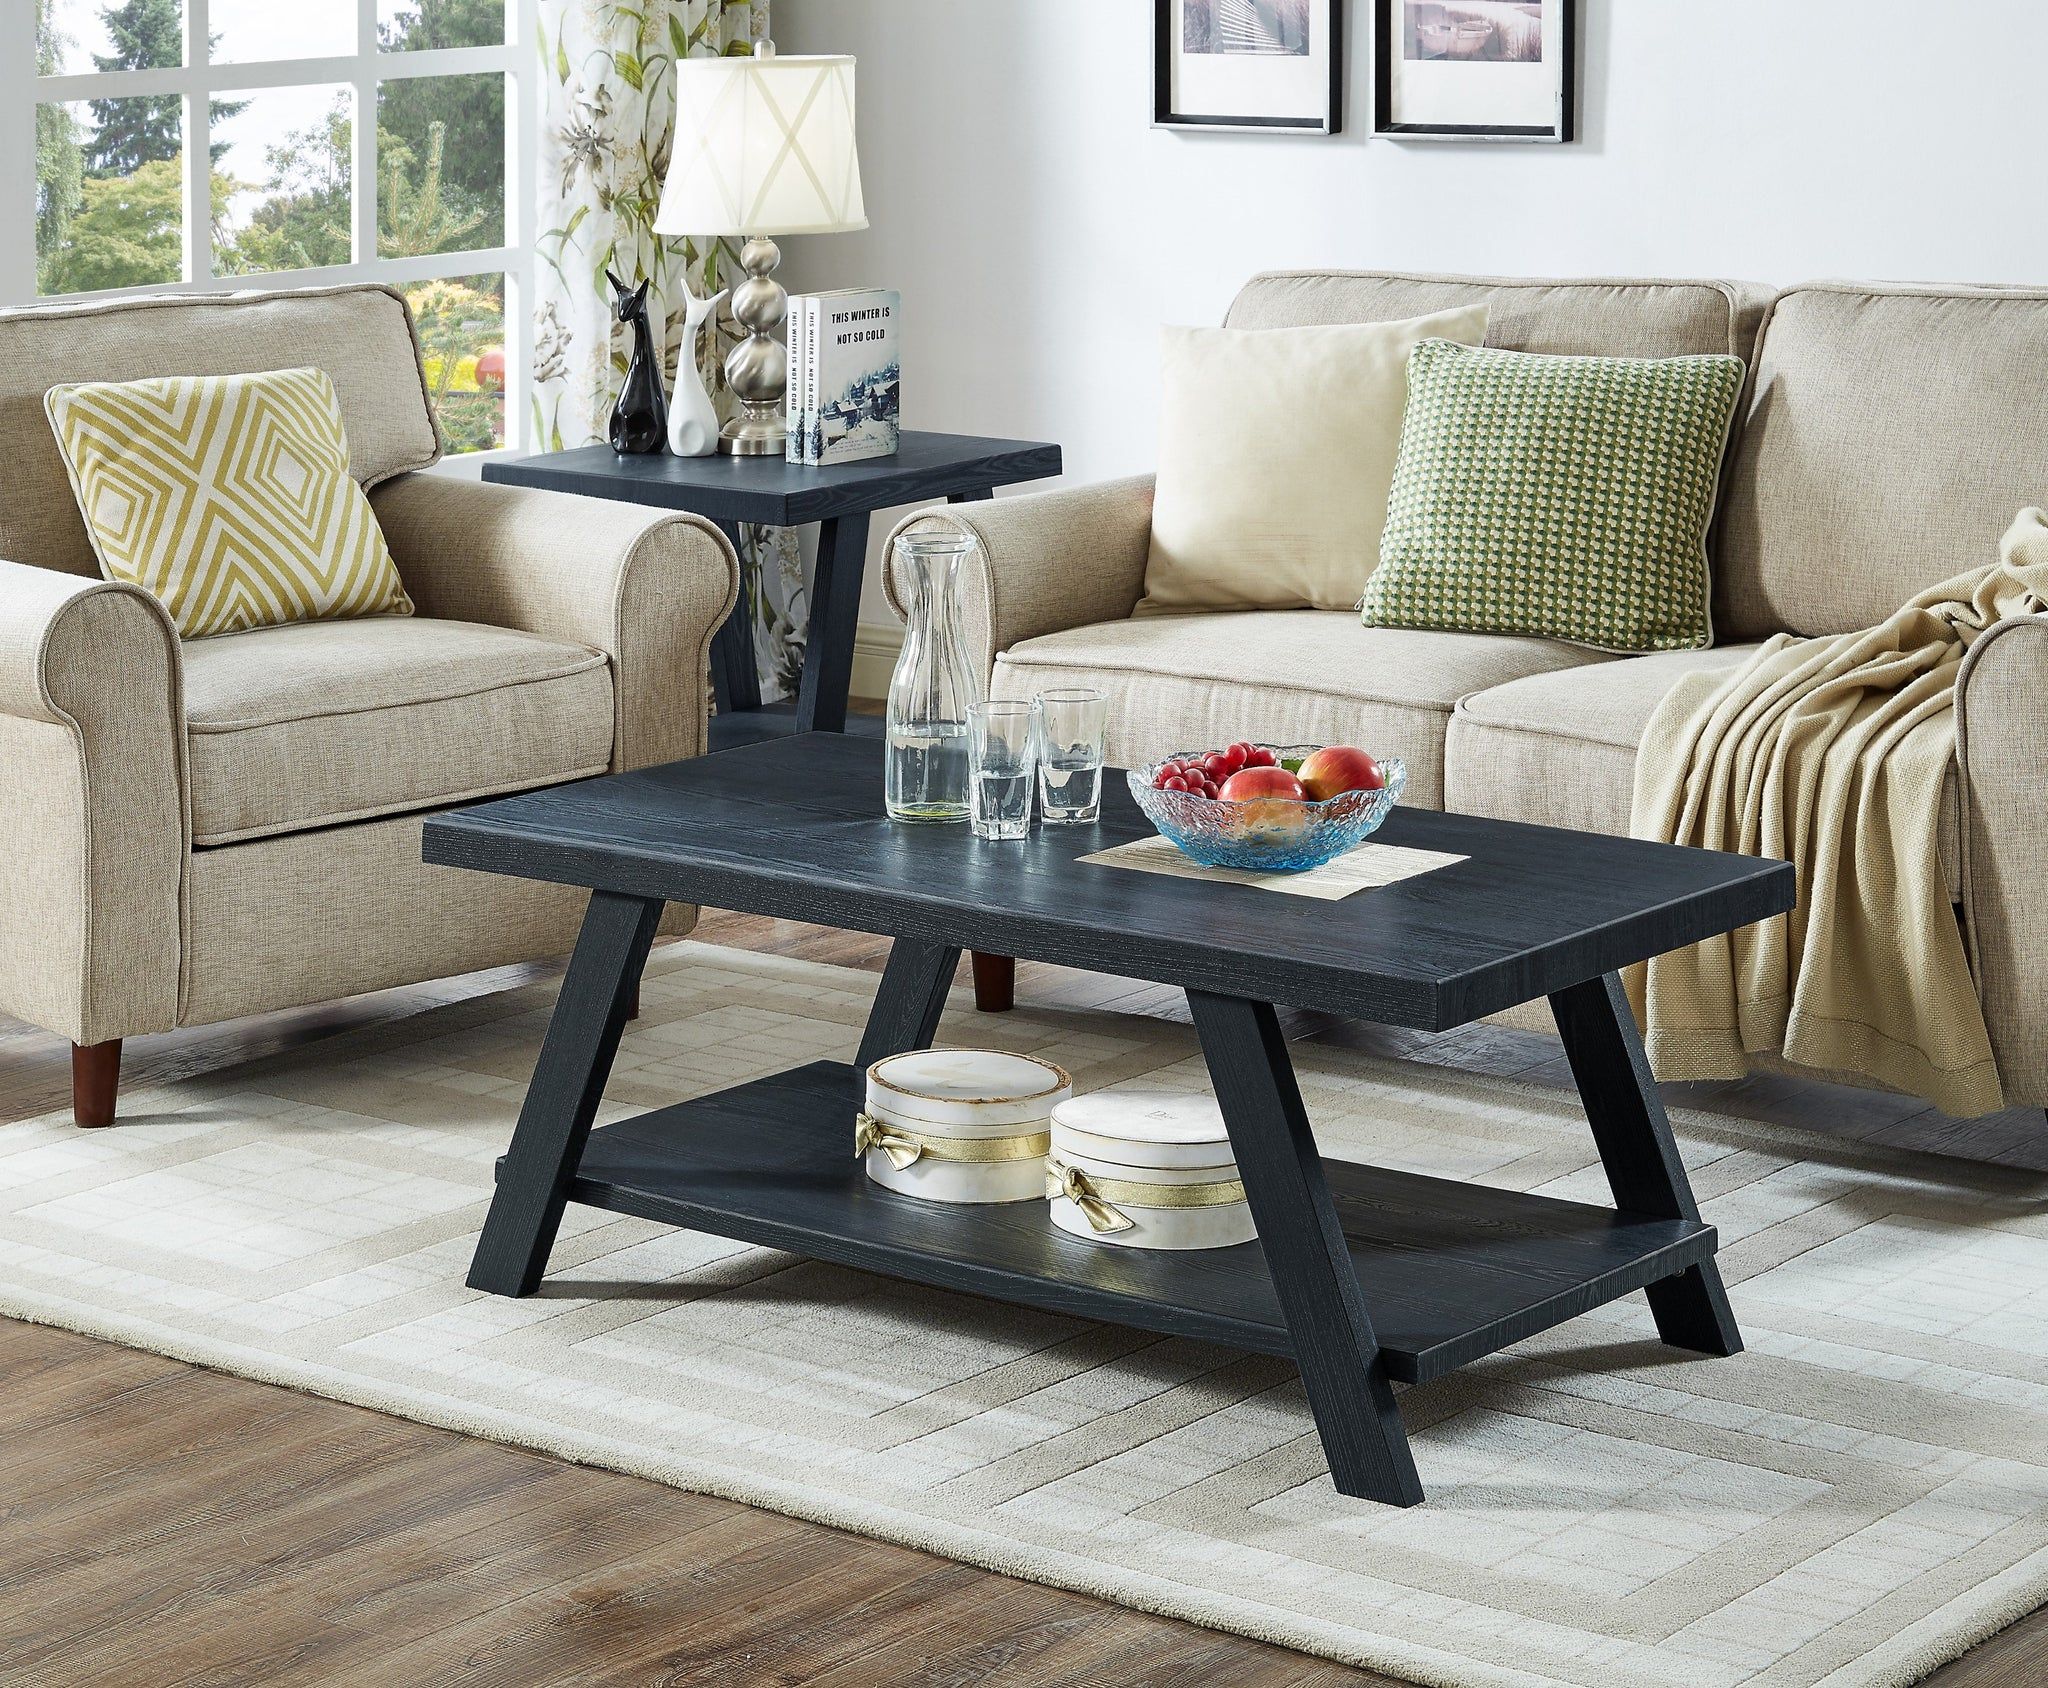 Athens Contemporary Replicated Wood Shelf Coffee Set Table In Black Fi In Pemberly Row Replicated Wood Coffee Tables (Gallery 4 of 20)